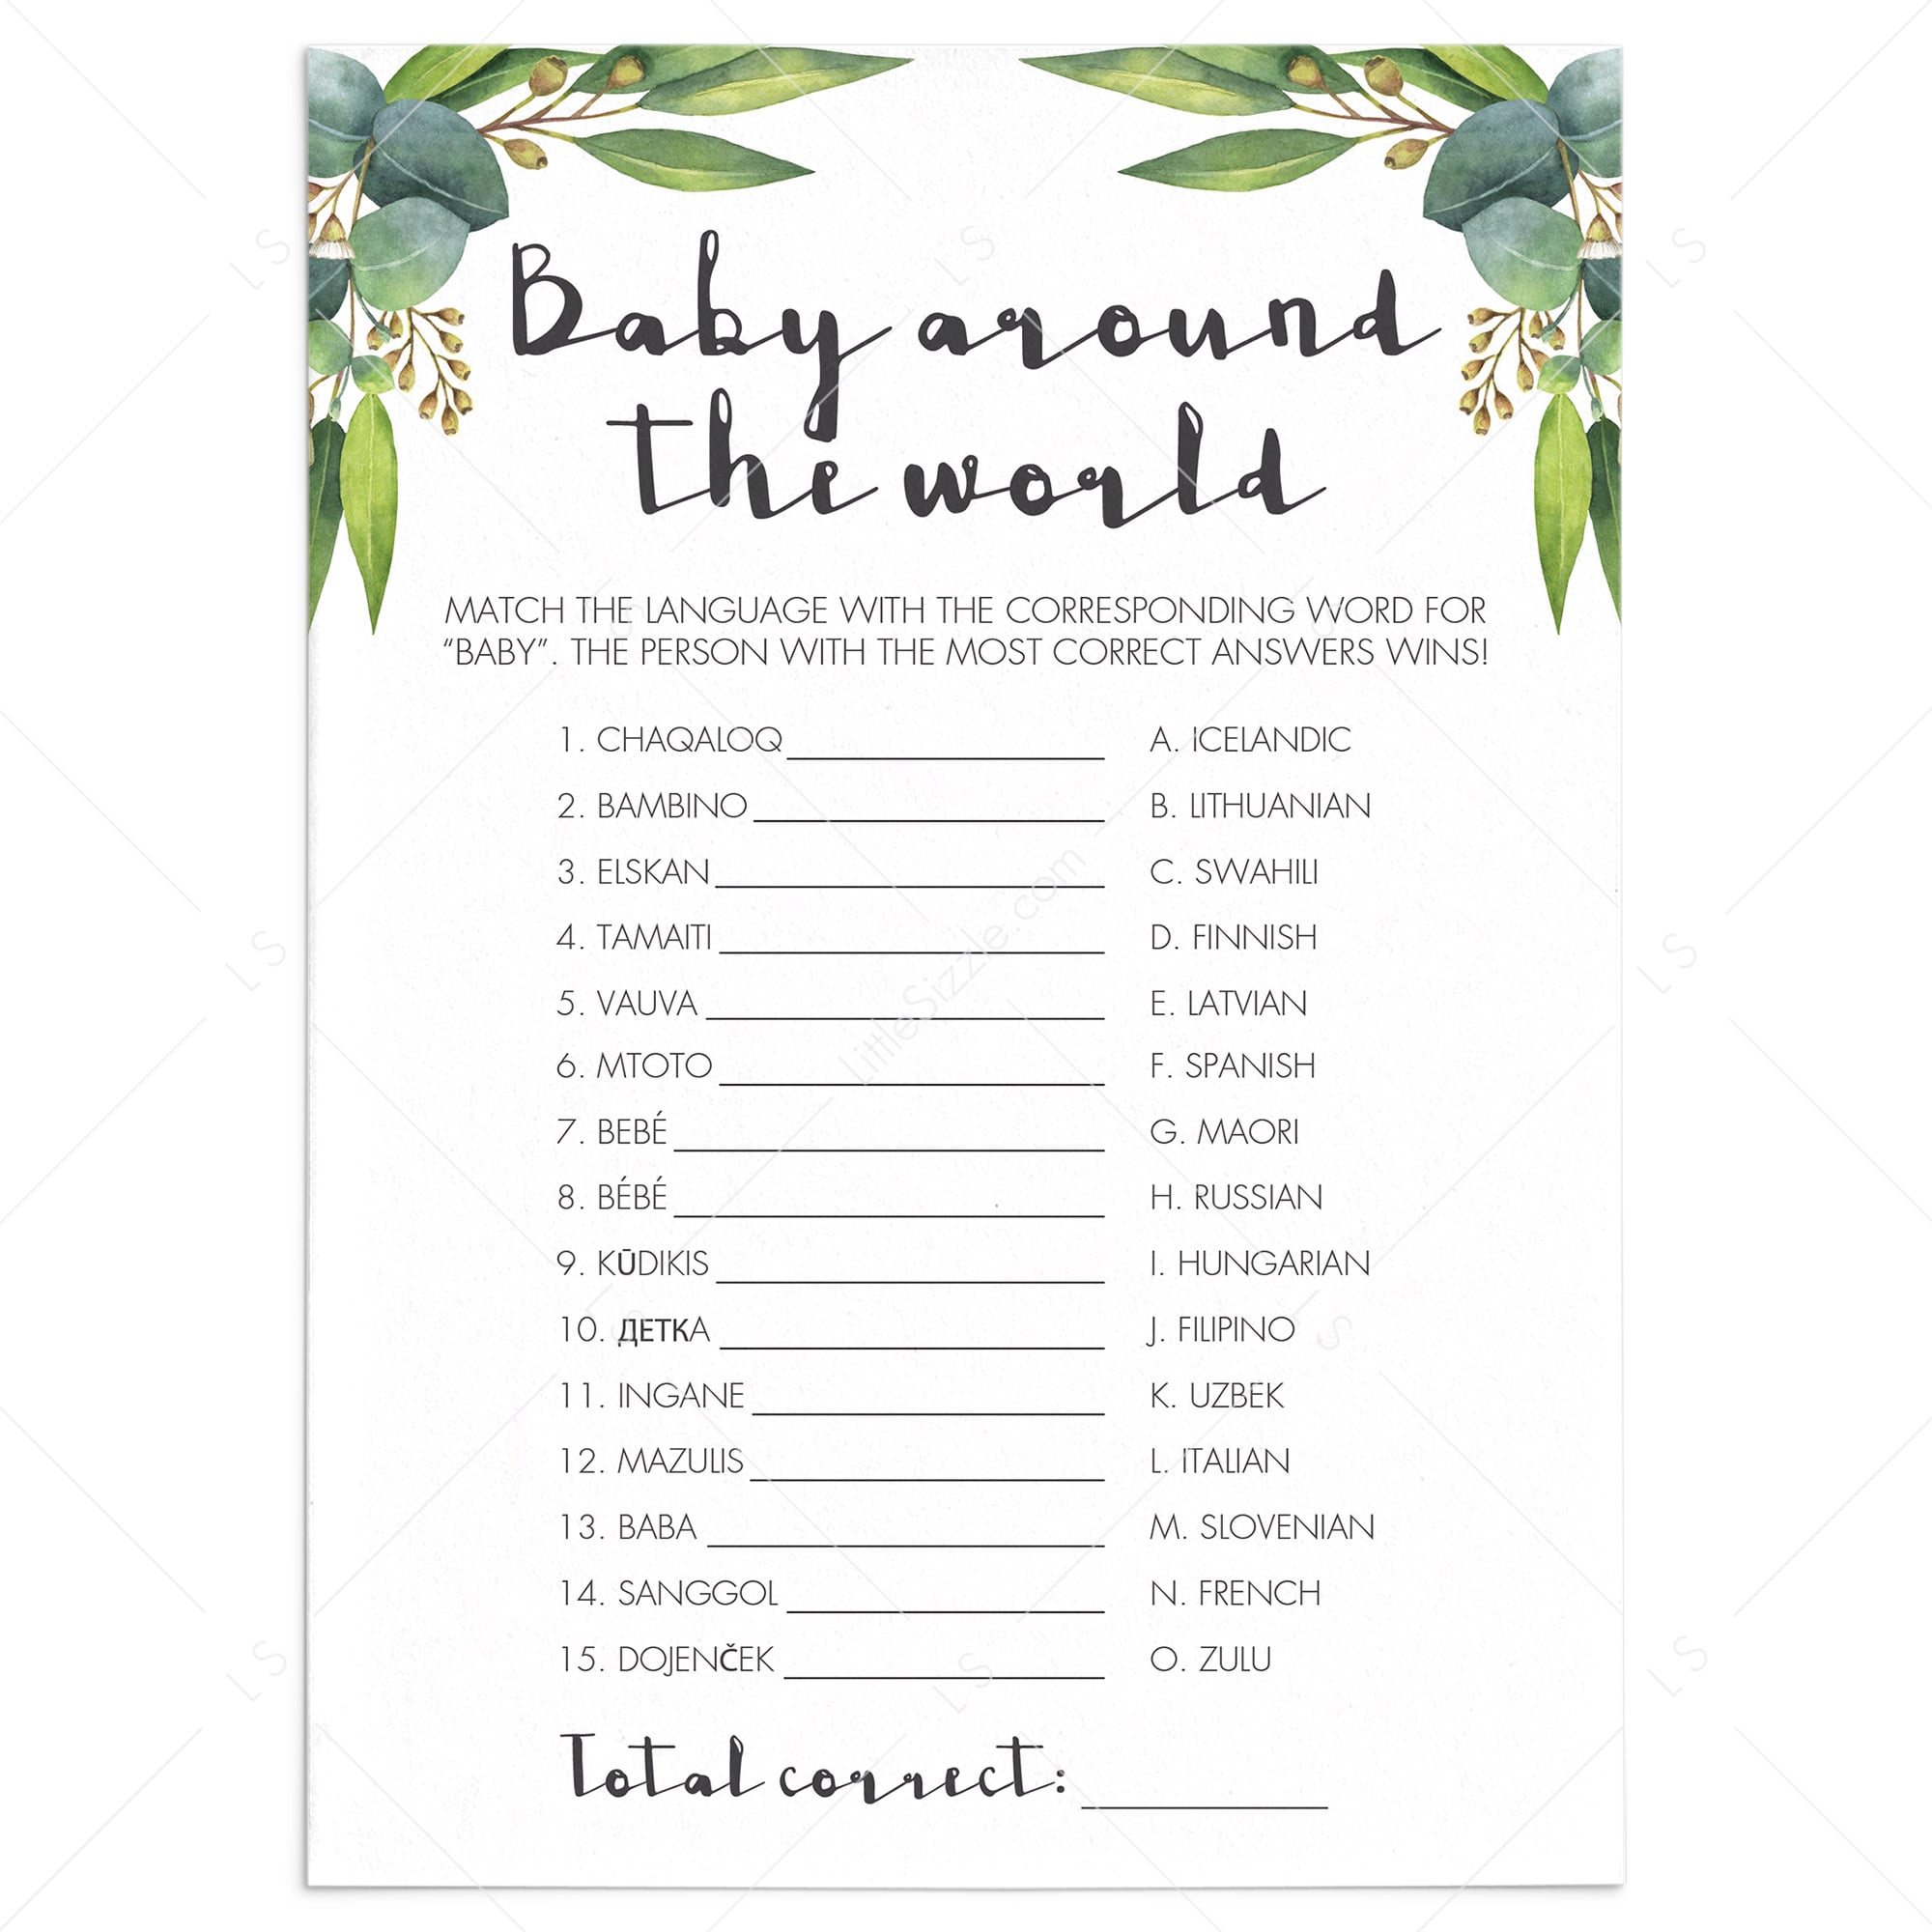 Baby around the world game for botanical baby shower by LittleSizzle